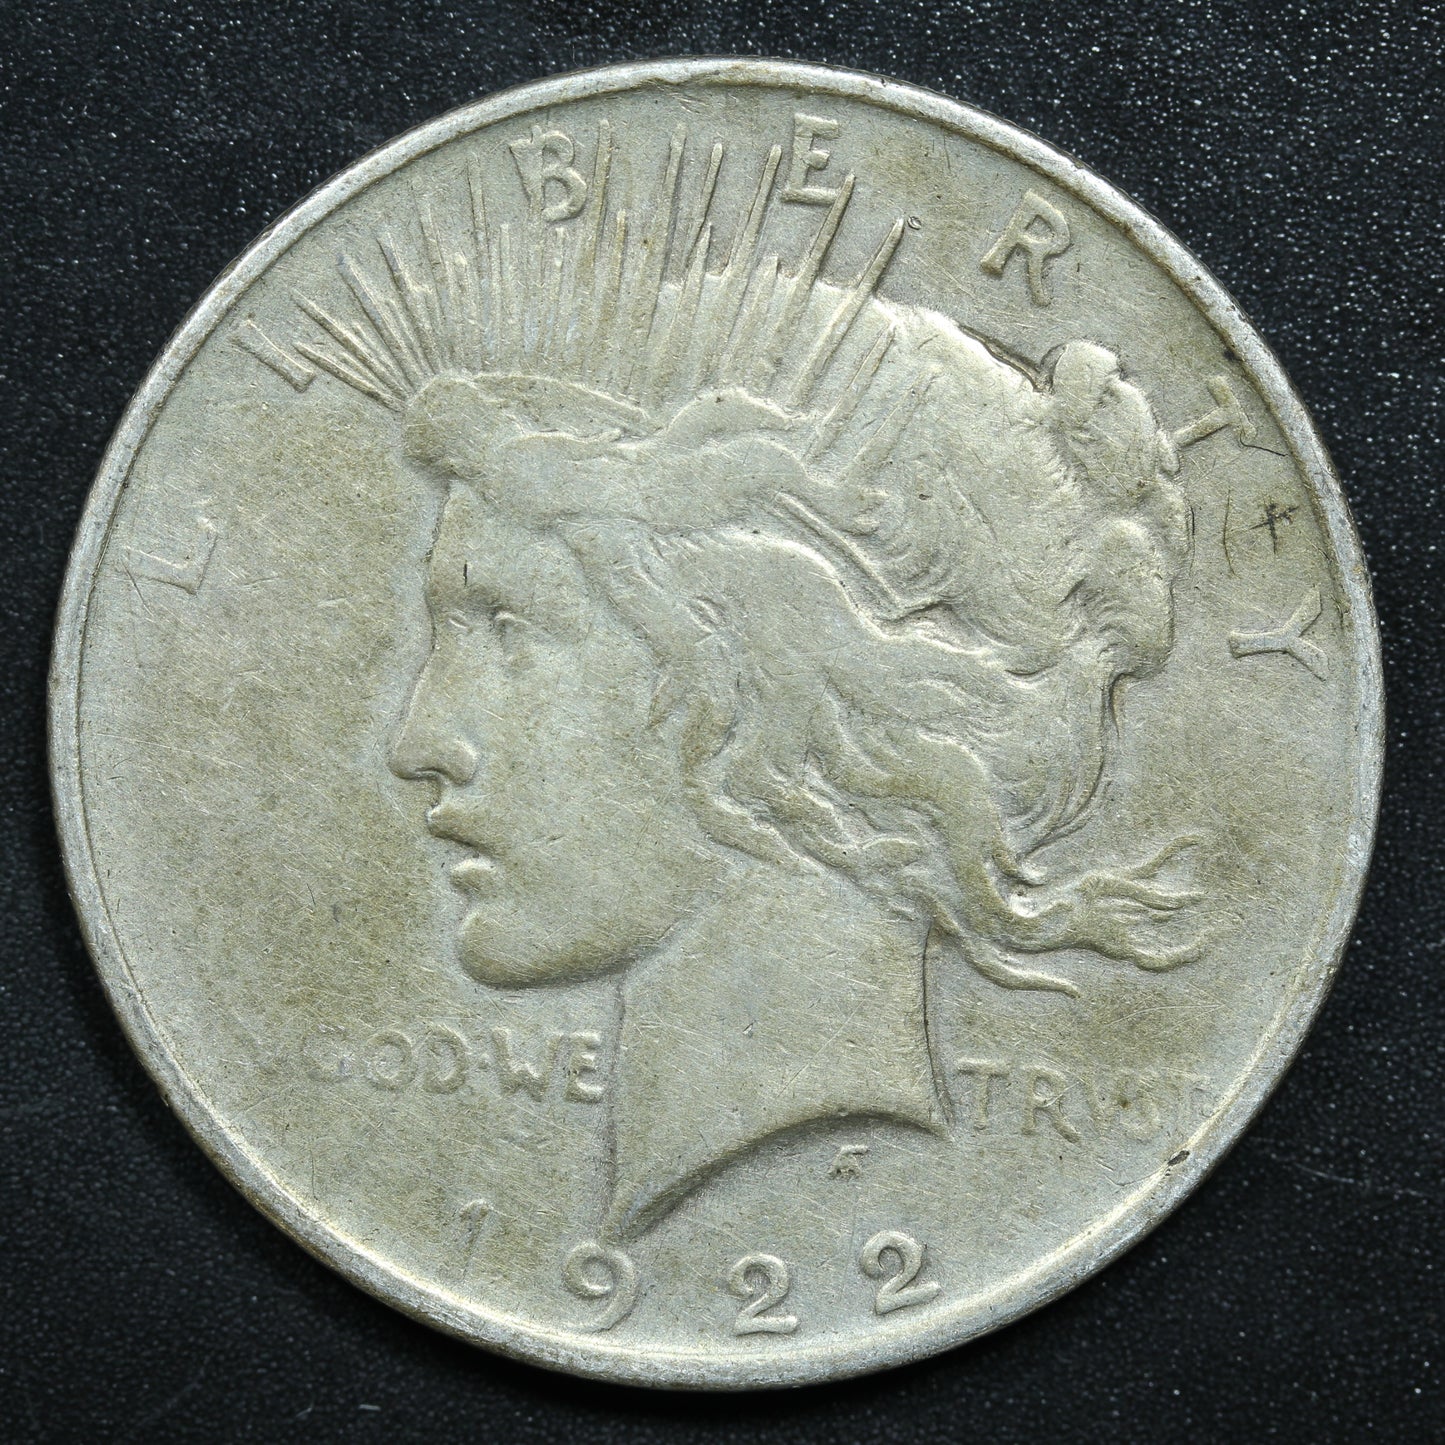 1922 Peace Dollar - Silver - Philadelphia - Exact Coin Pictured